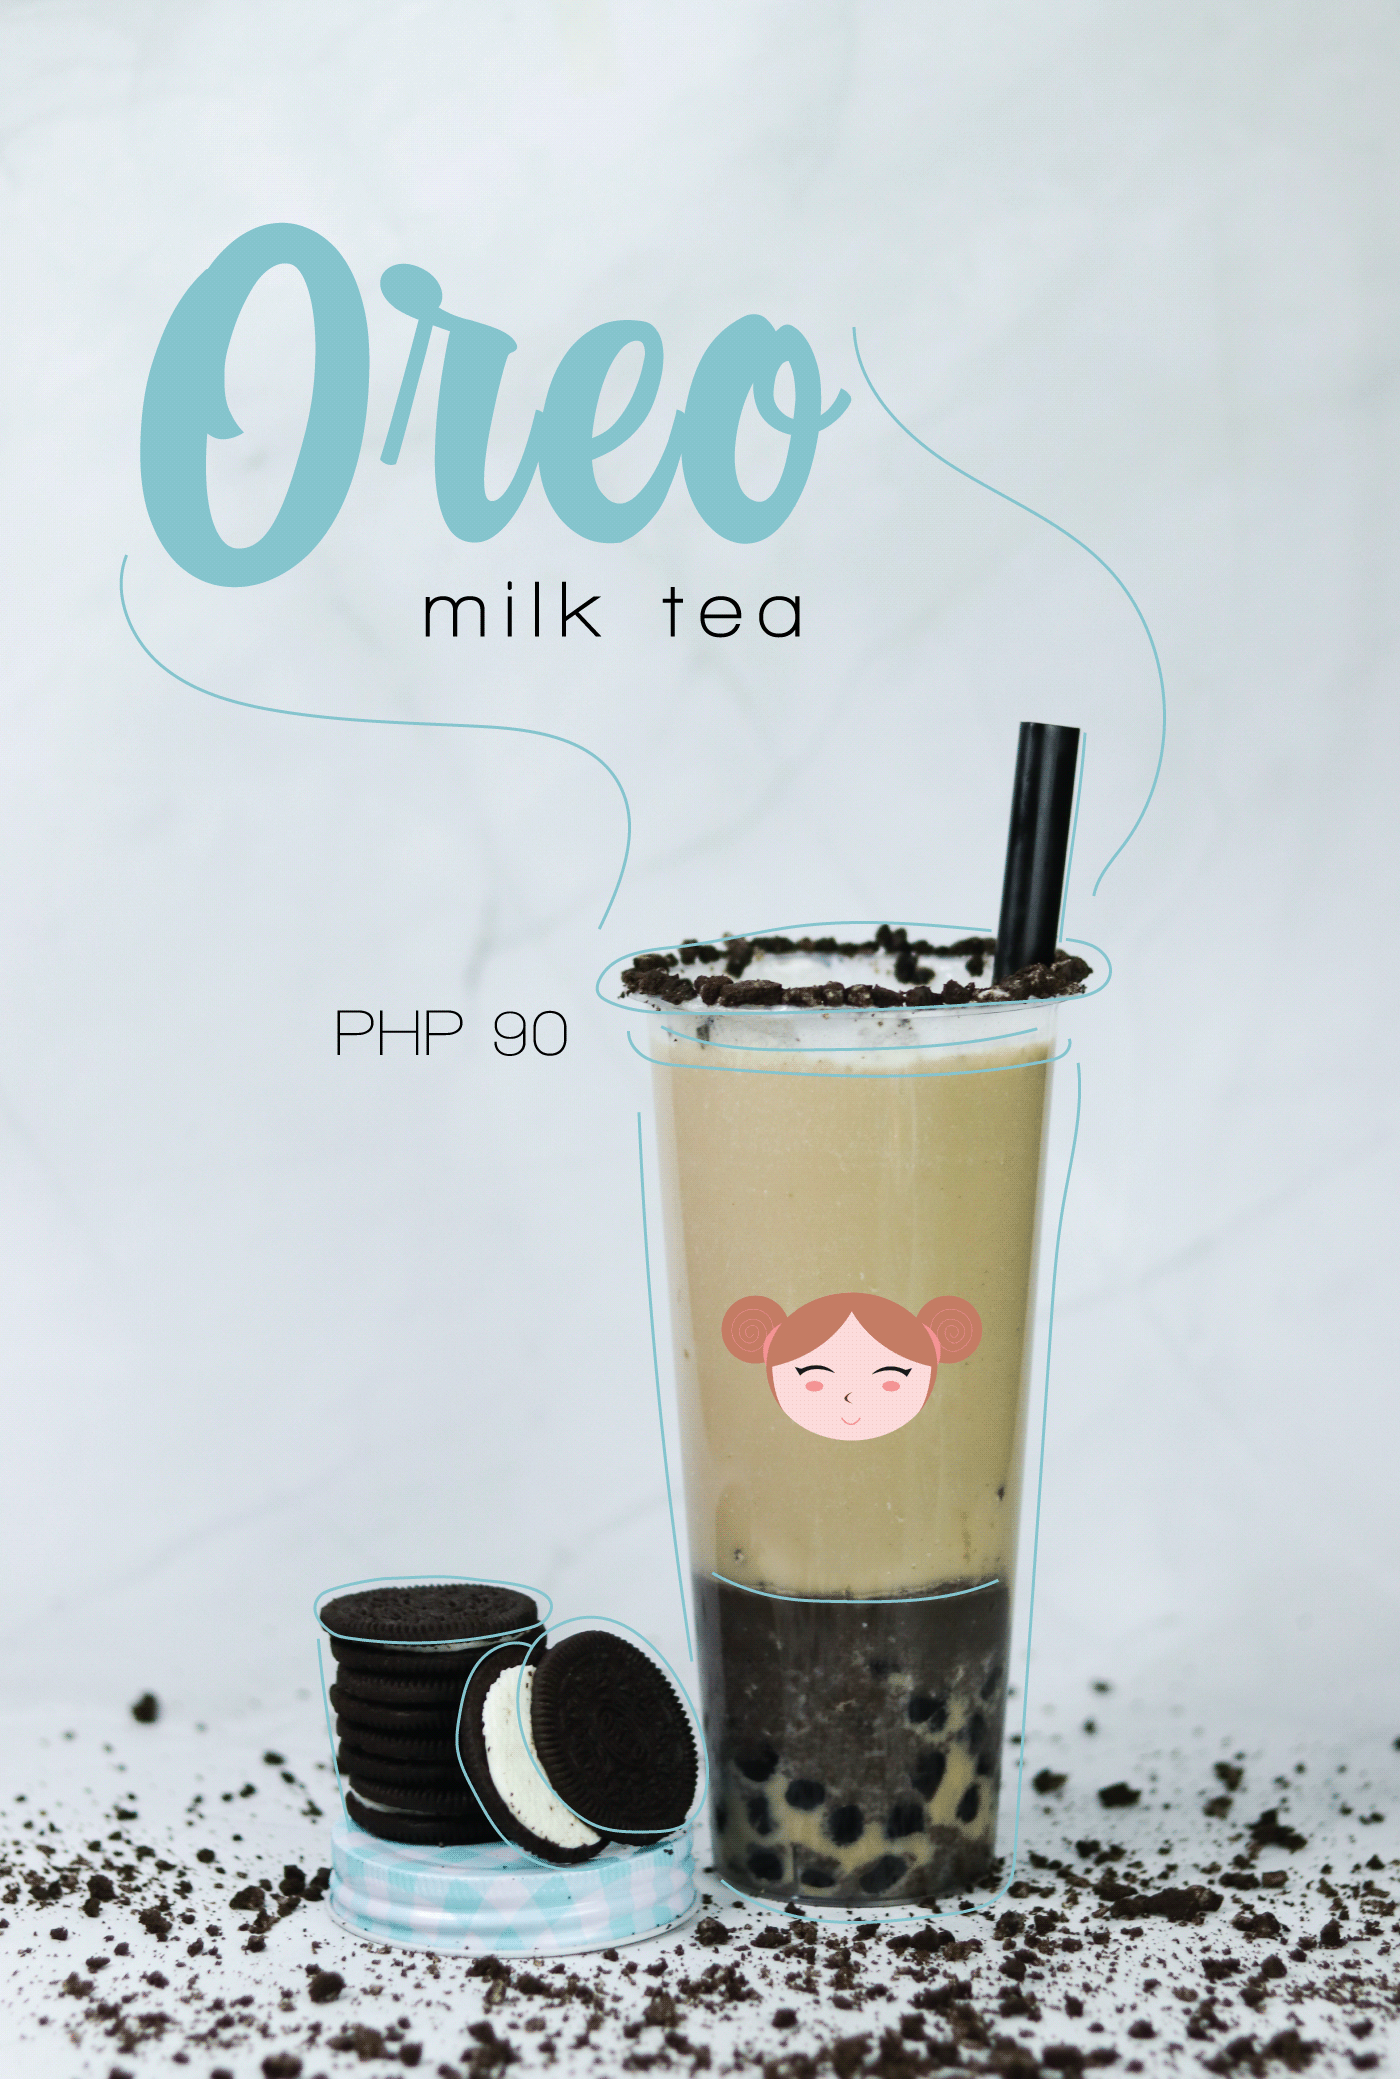 ad design Advertising  Beverage photography food photography graphic design  Marketing collateral milktea Online Business Product Photography